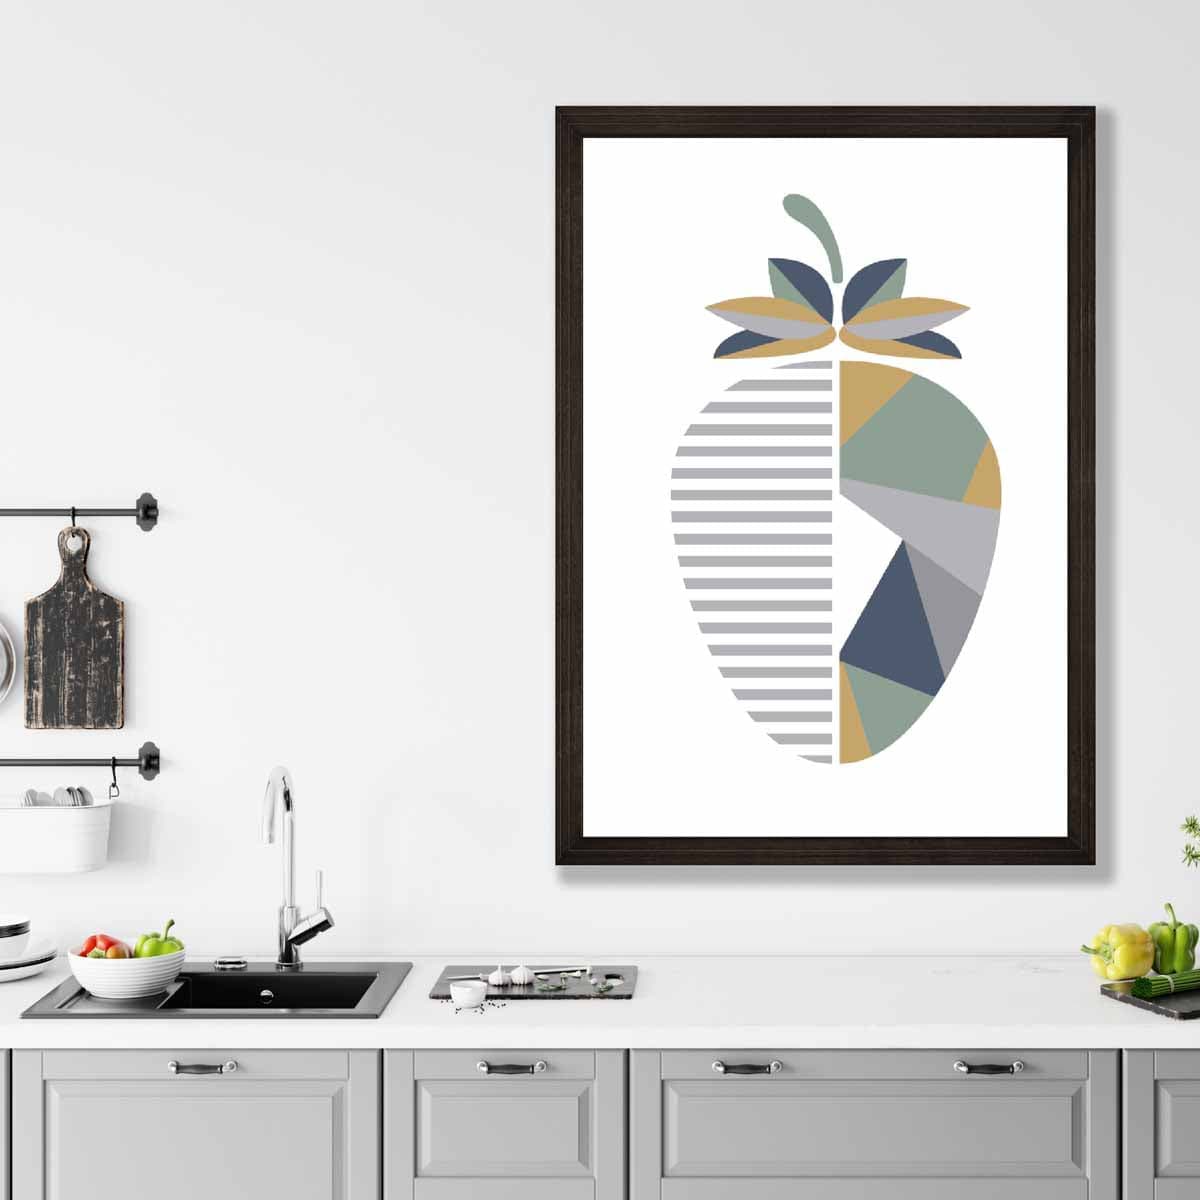 Geometric Fruit Poster of Strawberry in Sage green Blue Yellow